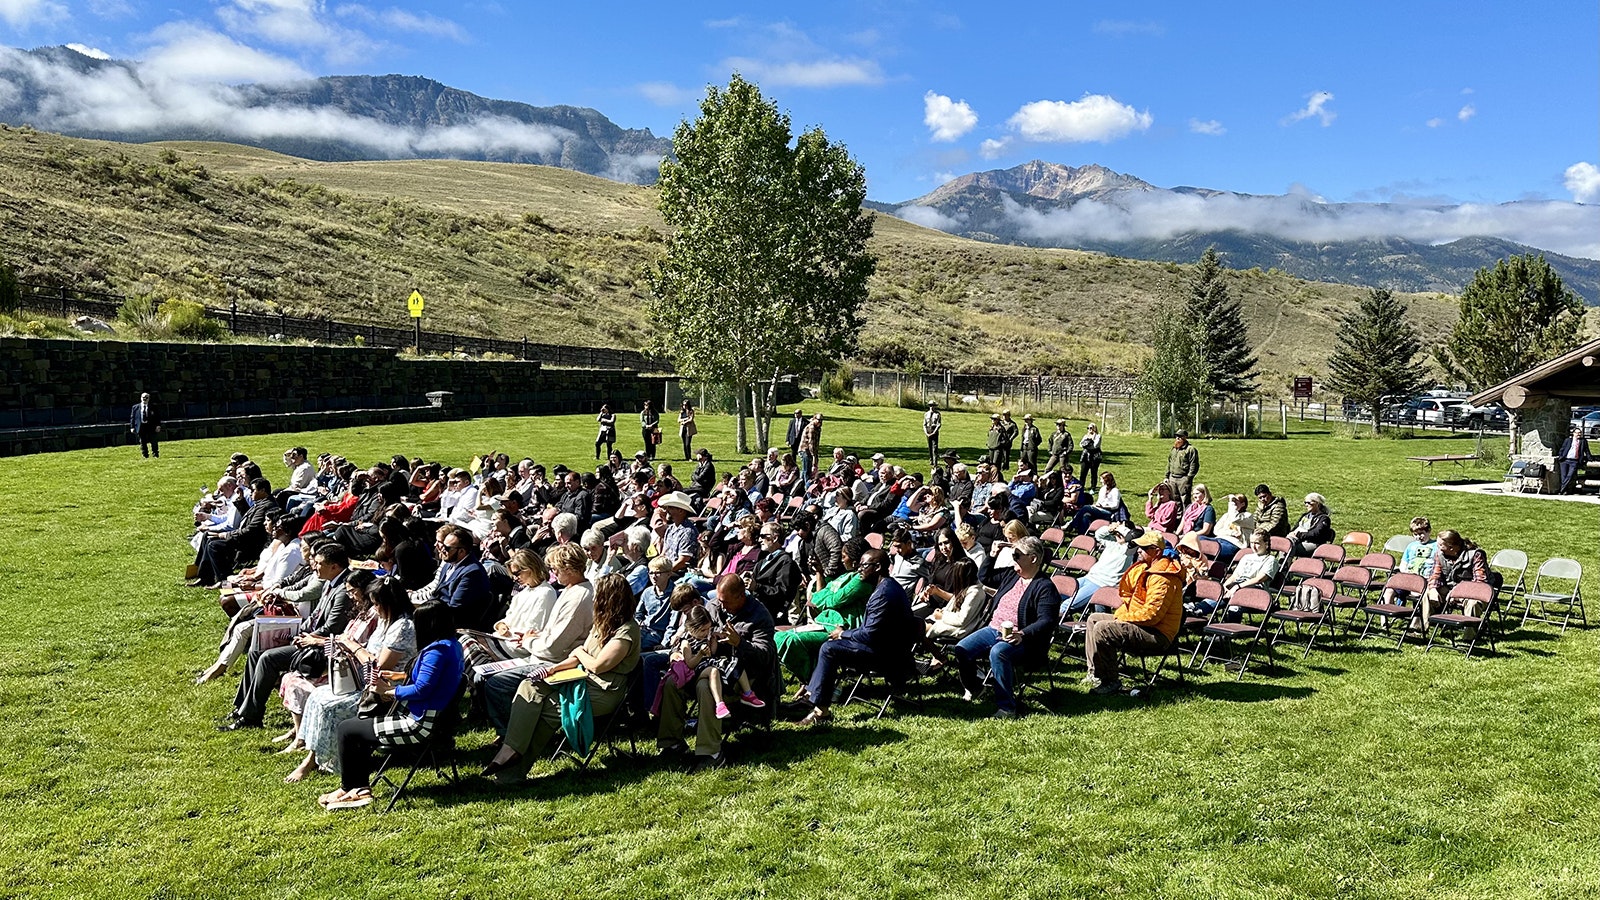 It was a clear, sunny day for a naturalization ceremony at Yellowstone.